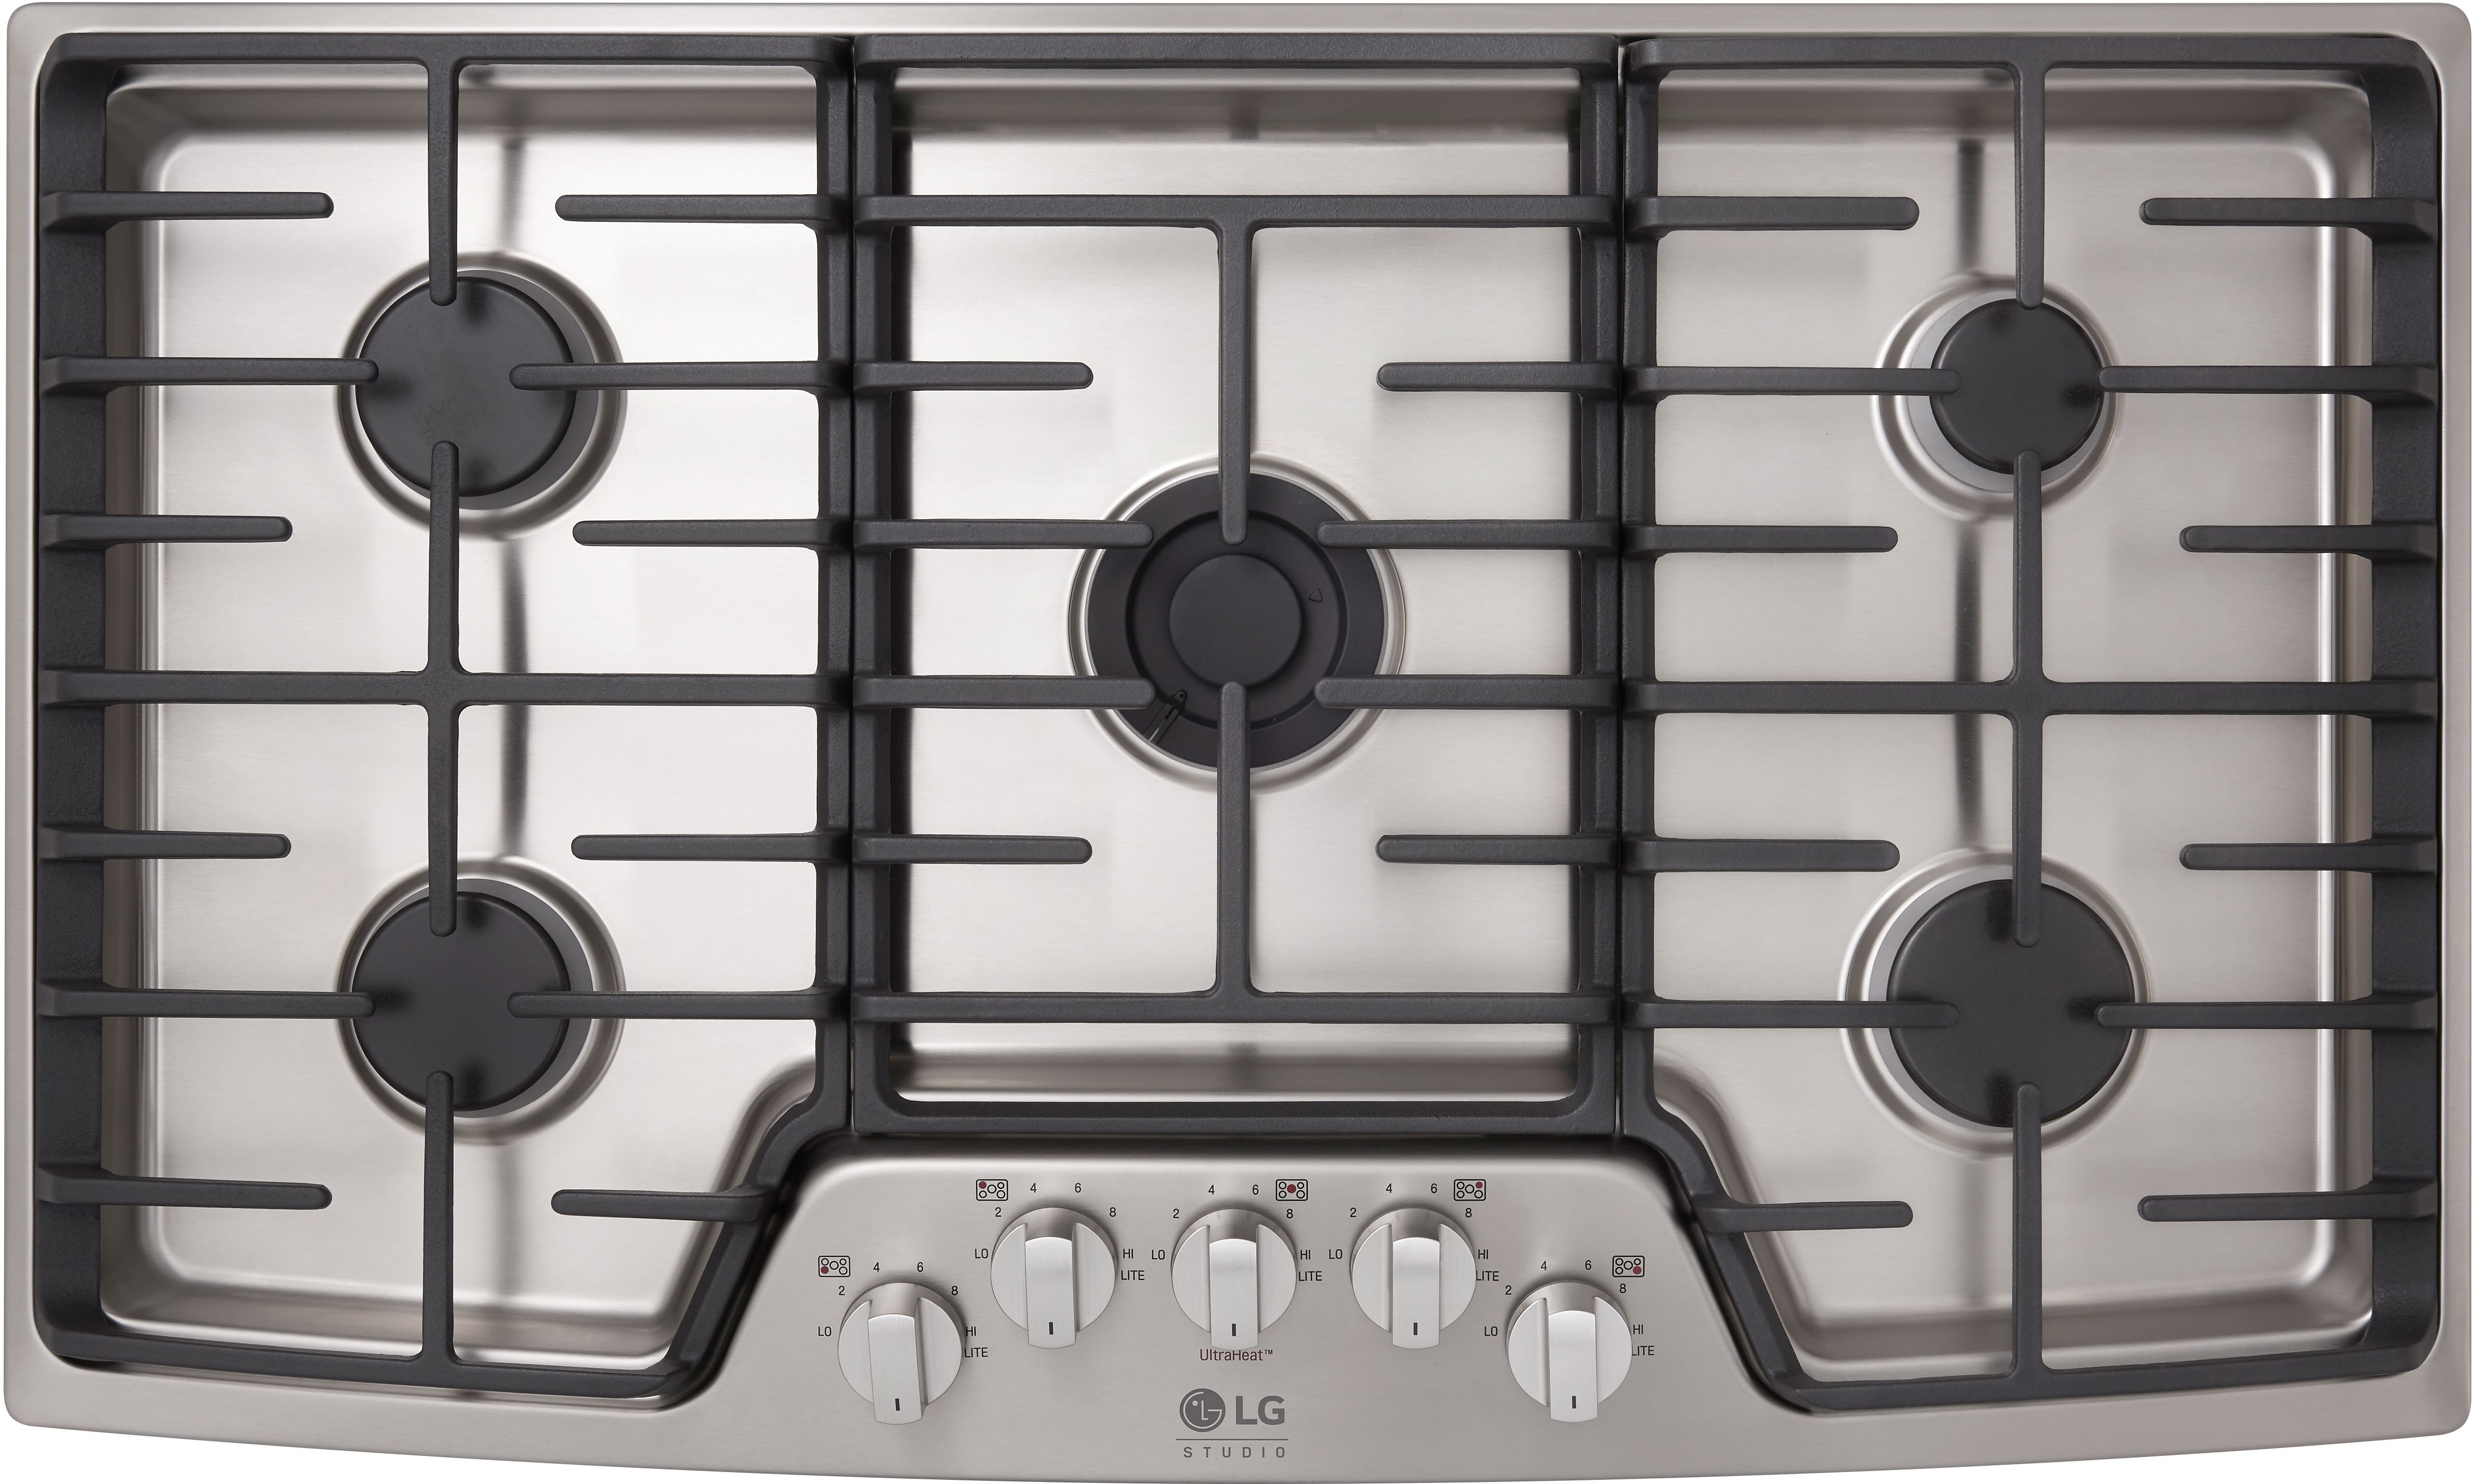 LG Studio 36" Stainless Steel Gas Cooktop-LSCG367ST